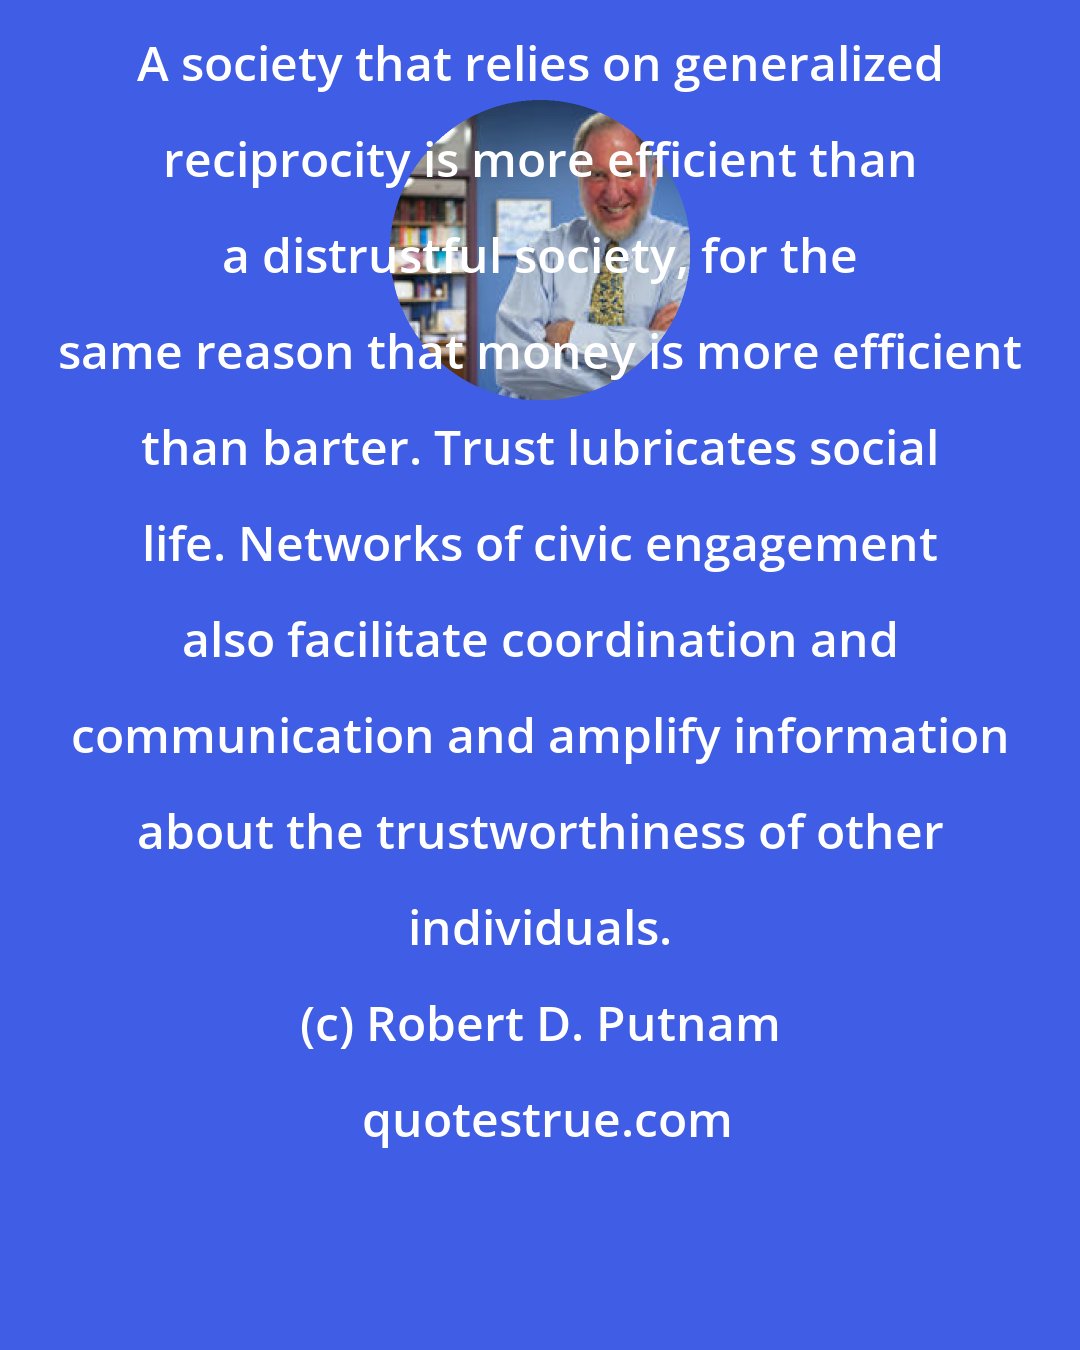 Robert D. Putnam: A society that relies on generalized reciprocity is more efficient than a distrustful society, for the same reason that money is more efficient than barter. Trust lubricates social life. Networks of civic engagement also facilitate coordination and communication and amplify information about the trustworthiness of other individuals.